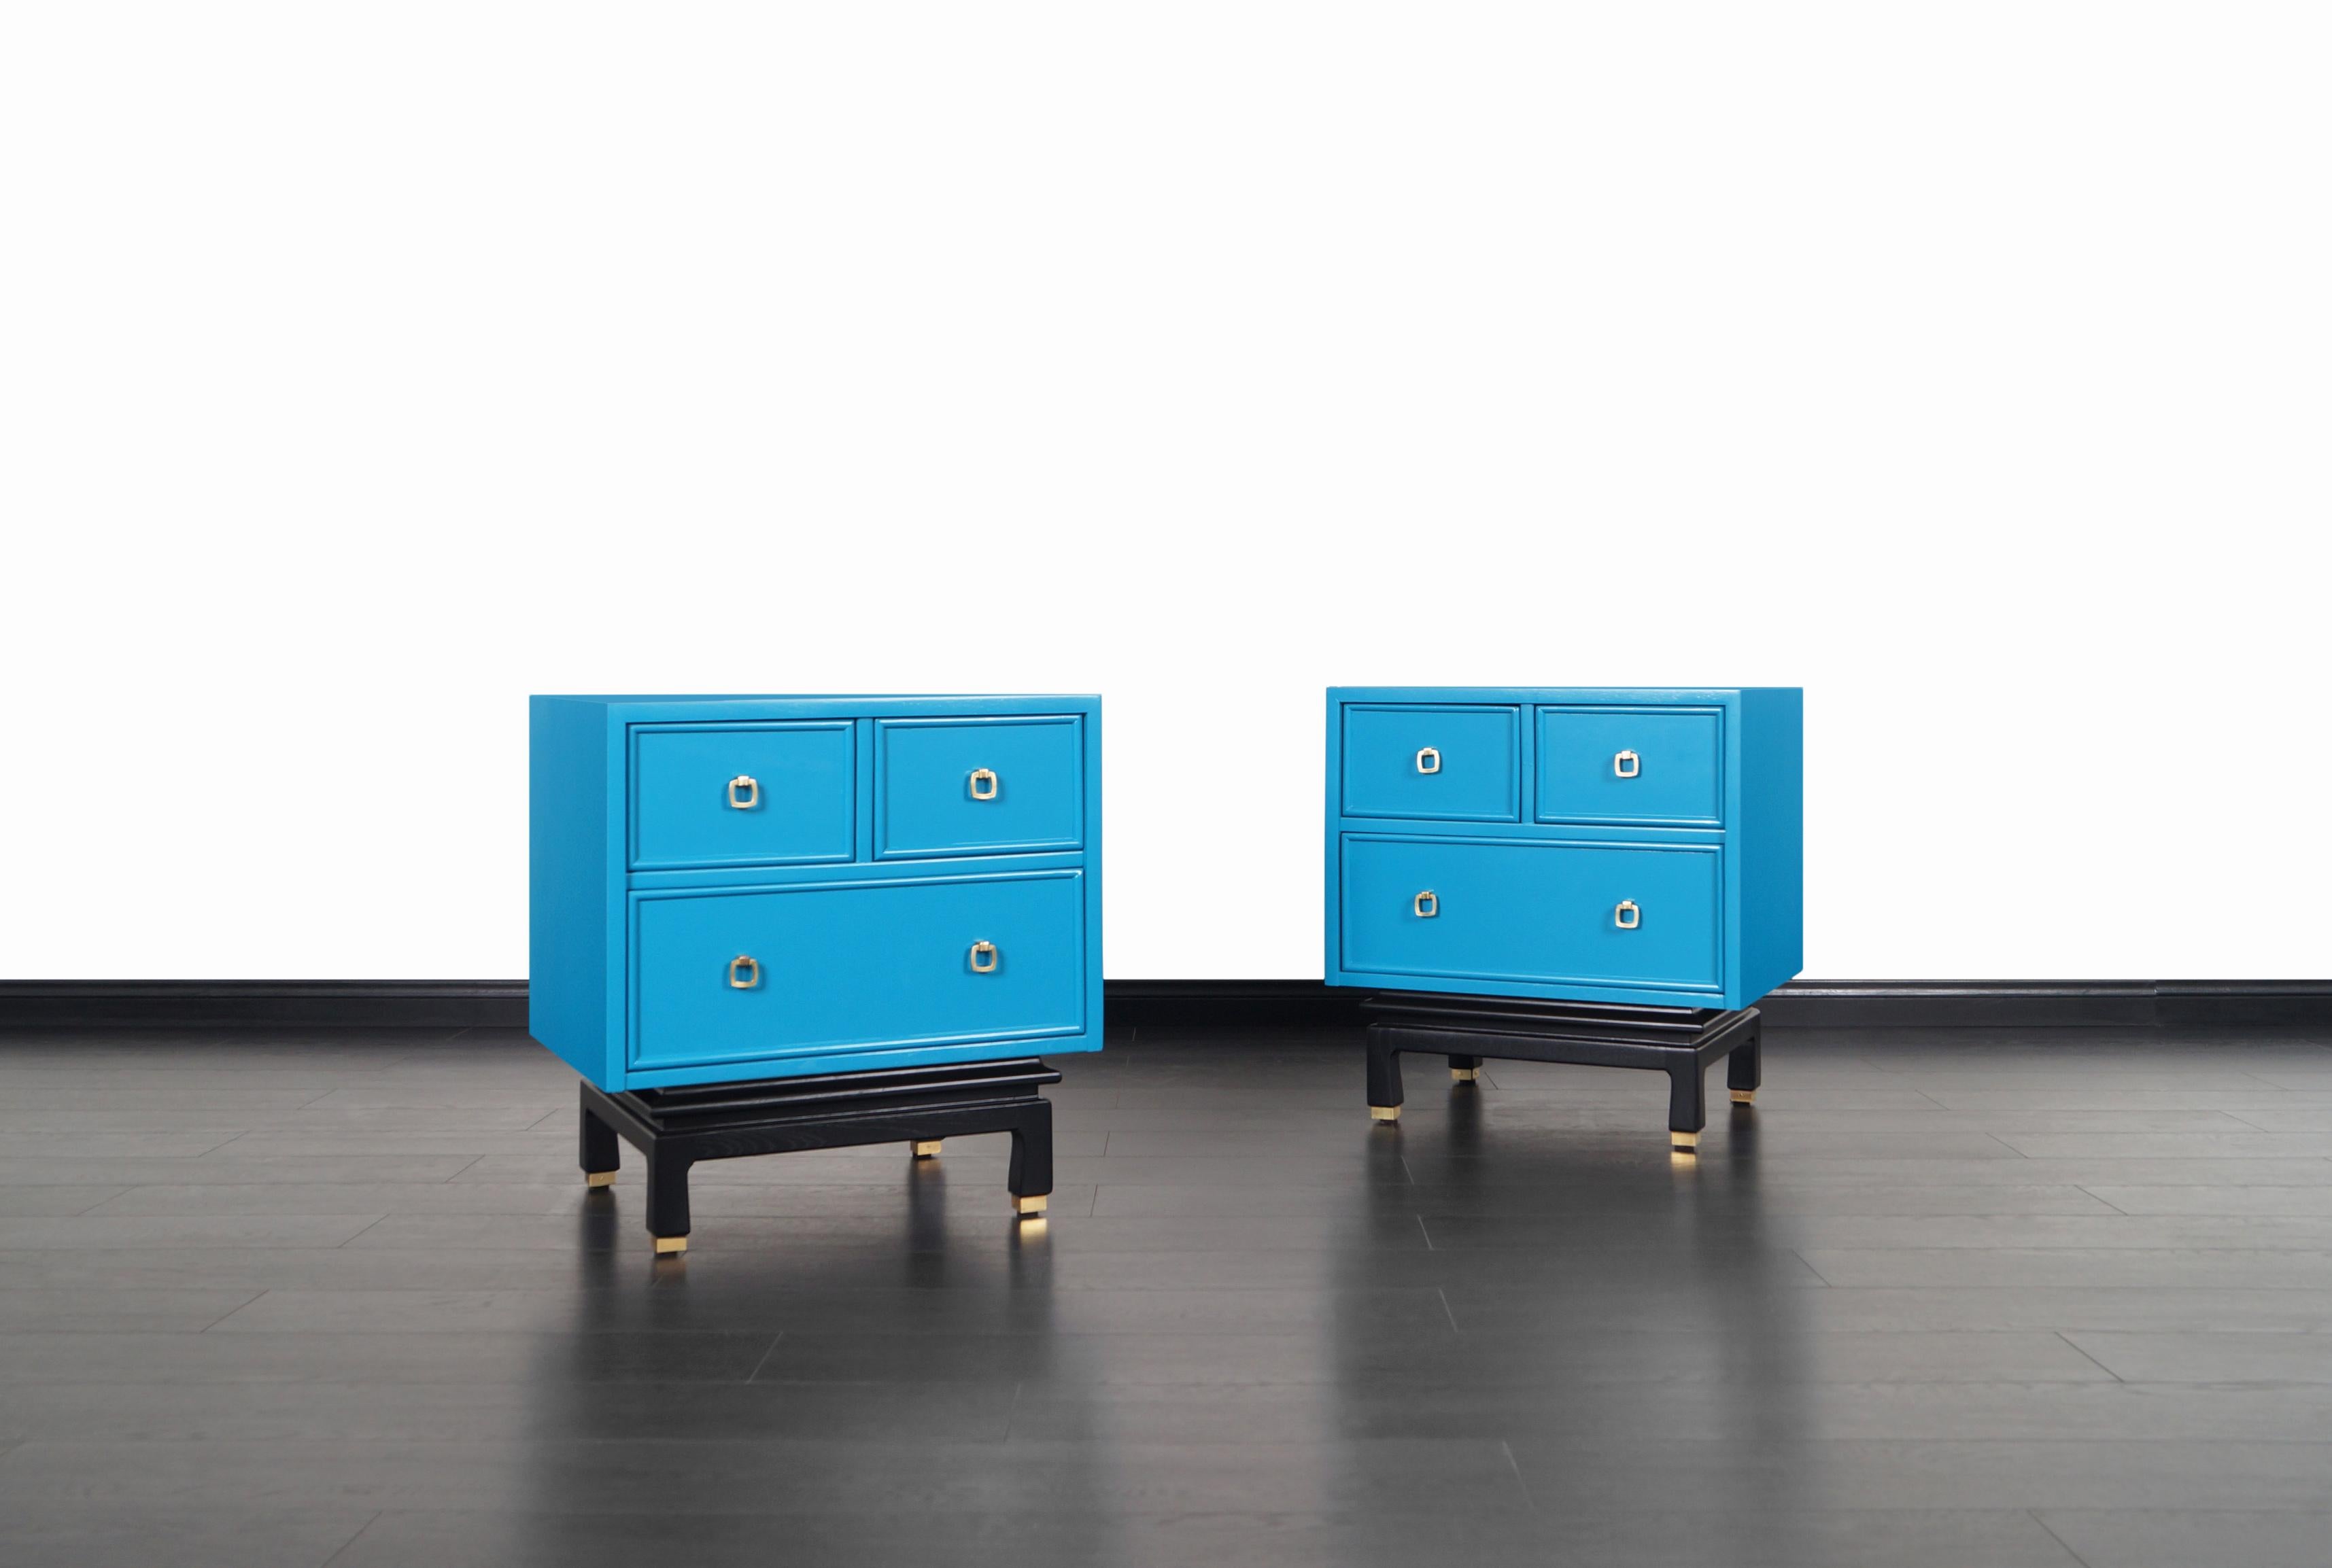 Pair of beautiful lacquered nightstands designed and manufactured by American of Martinsville in the United States, circa 1950s. These lovely nightstands are professionally restored in Olympic blue lacquer finish. Each nightstand features three